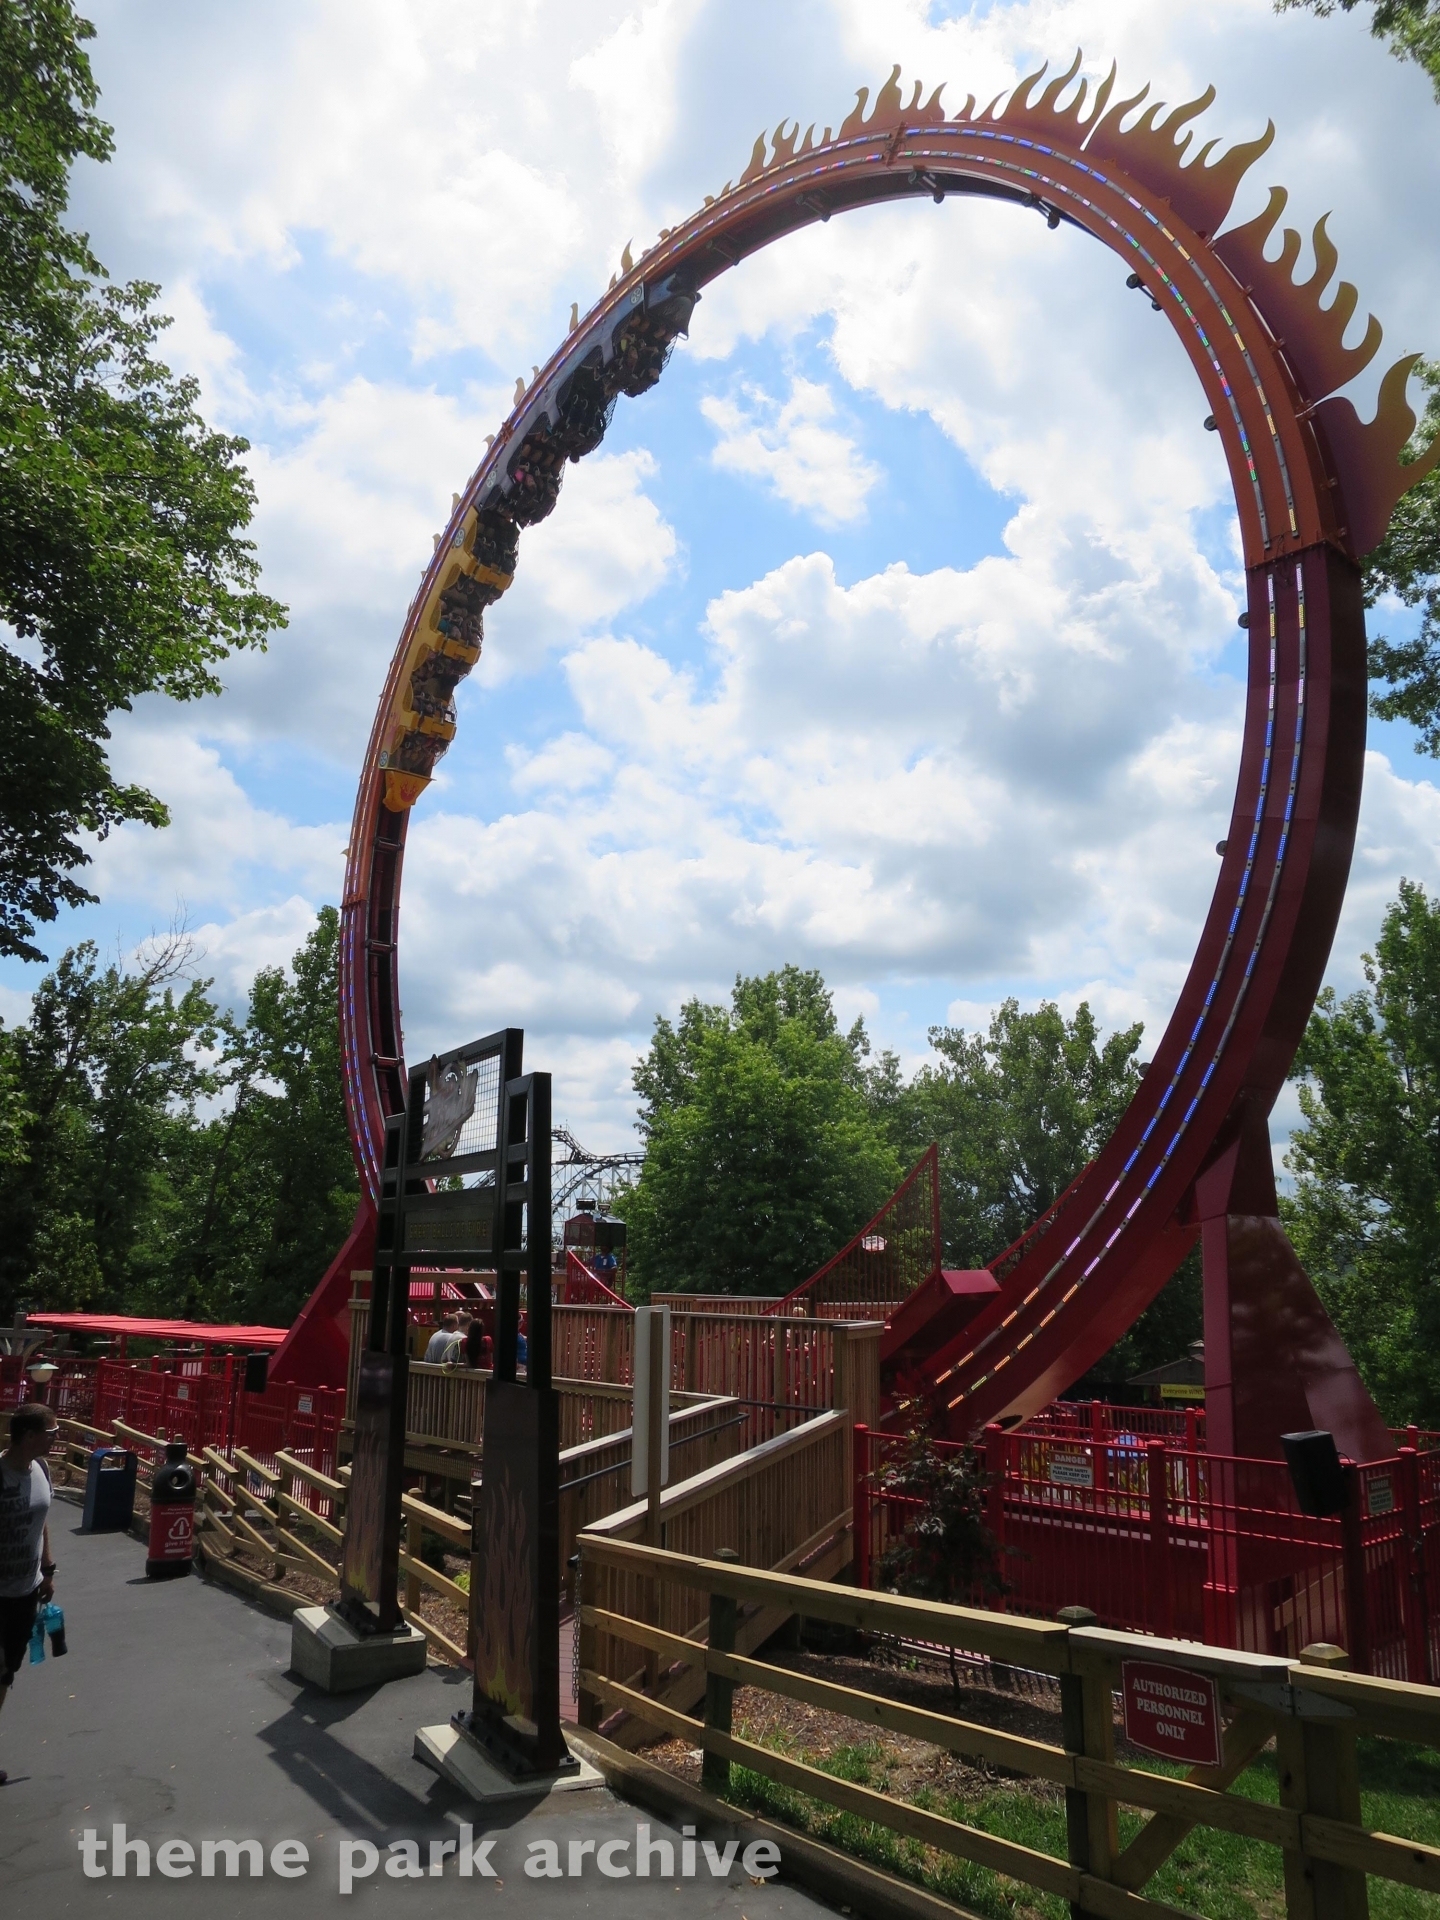 Fireball at Six Flags St. Louis | Theme Park Archive